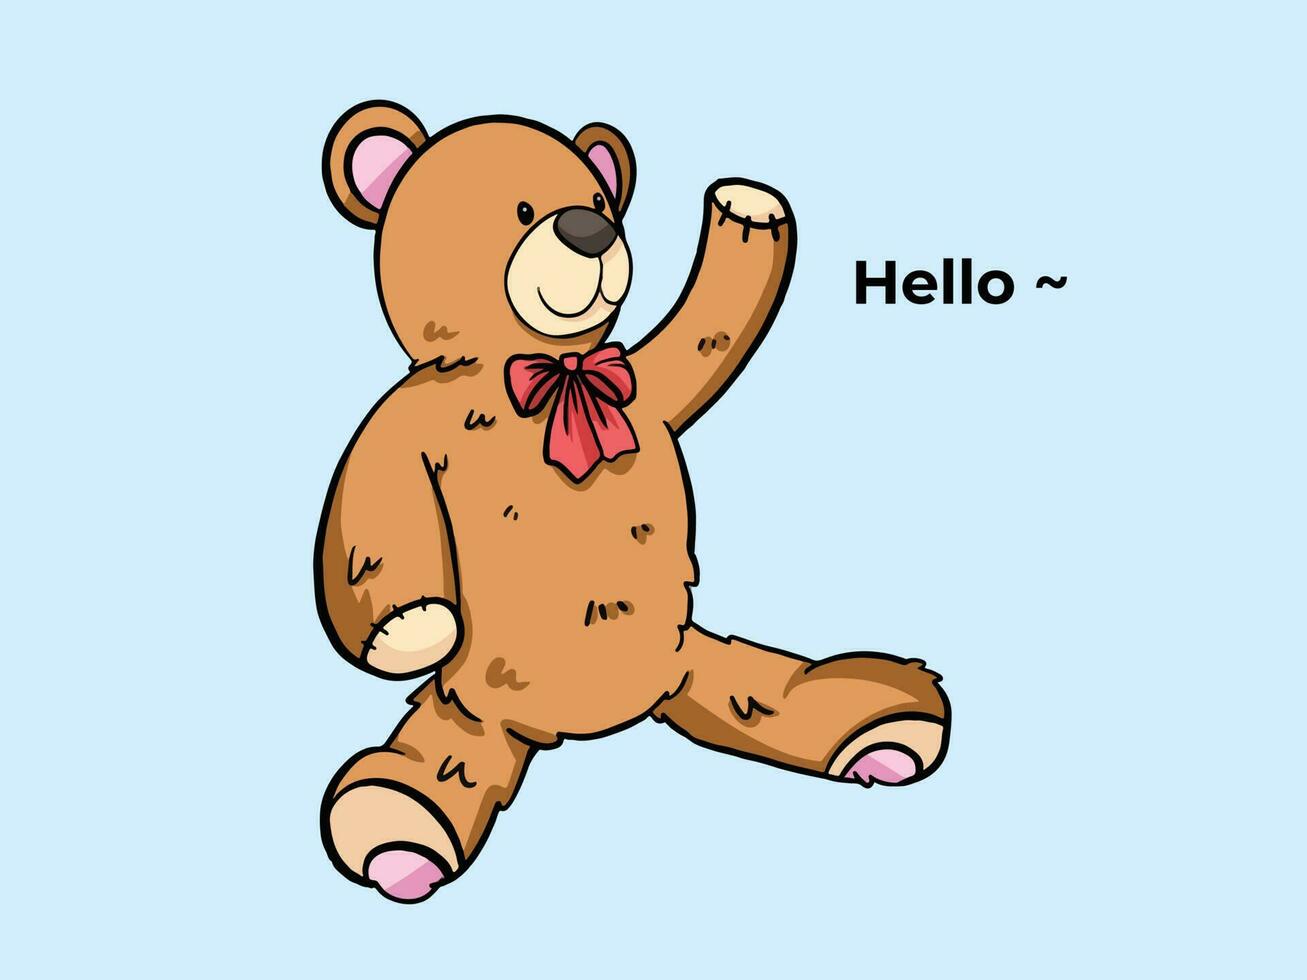 https://static.vecteezy.com/system/resources/previews/023/799/806/non_2x/cute-soft-brown-teddy-bear-illustration-with-hello-greetings-gesture-pose-isolated-on-horizontal-baby-blue-background-outlined-simple-flat-art-styled-drawing-free-vector.jpg